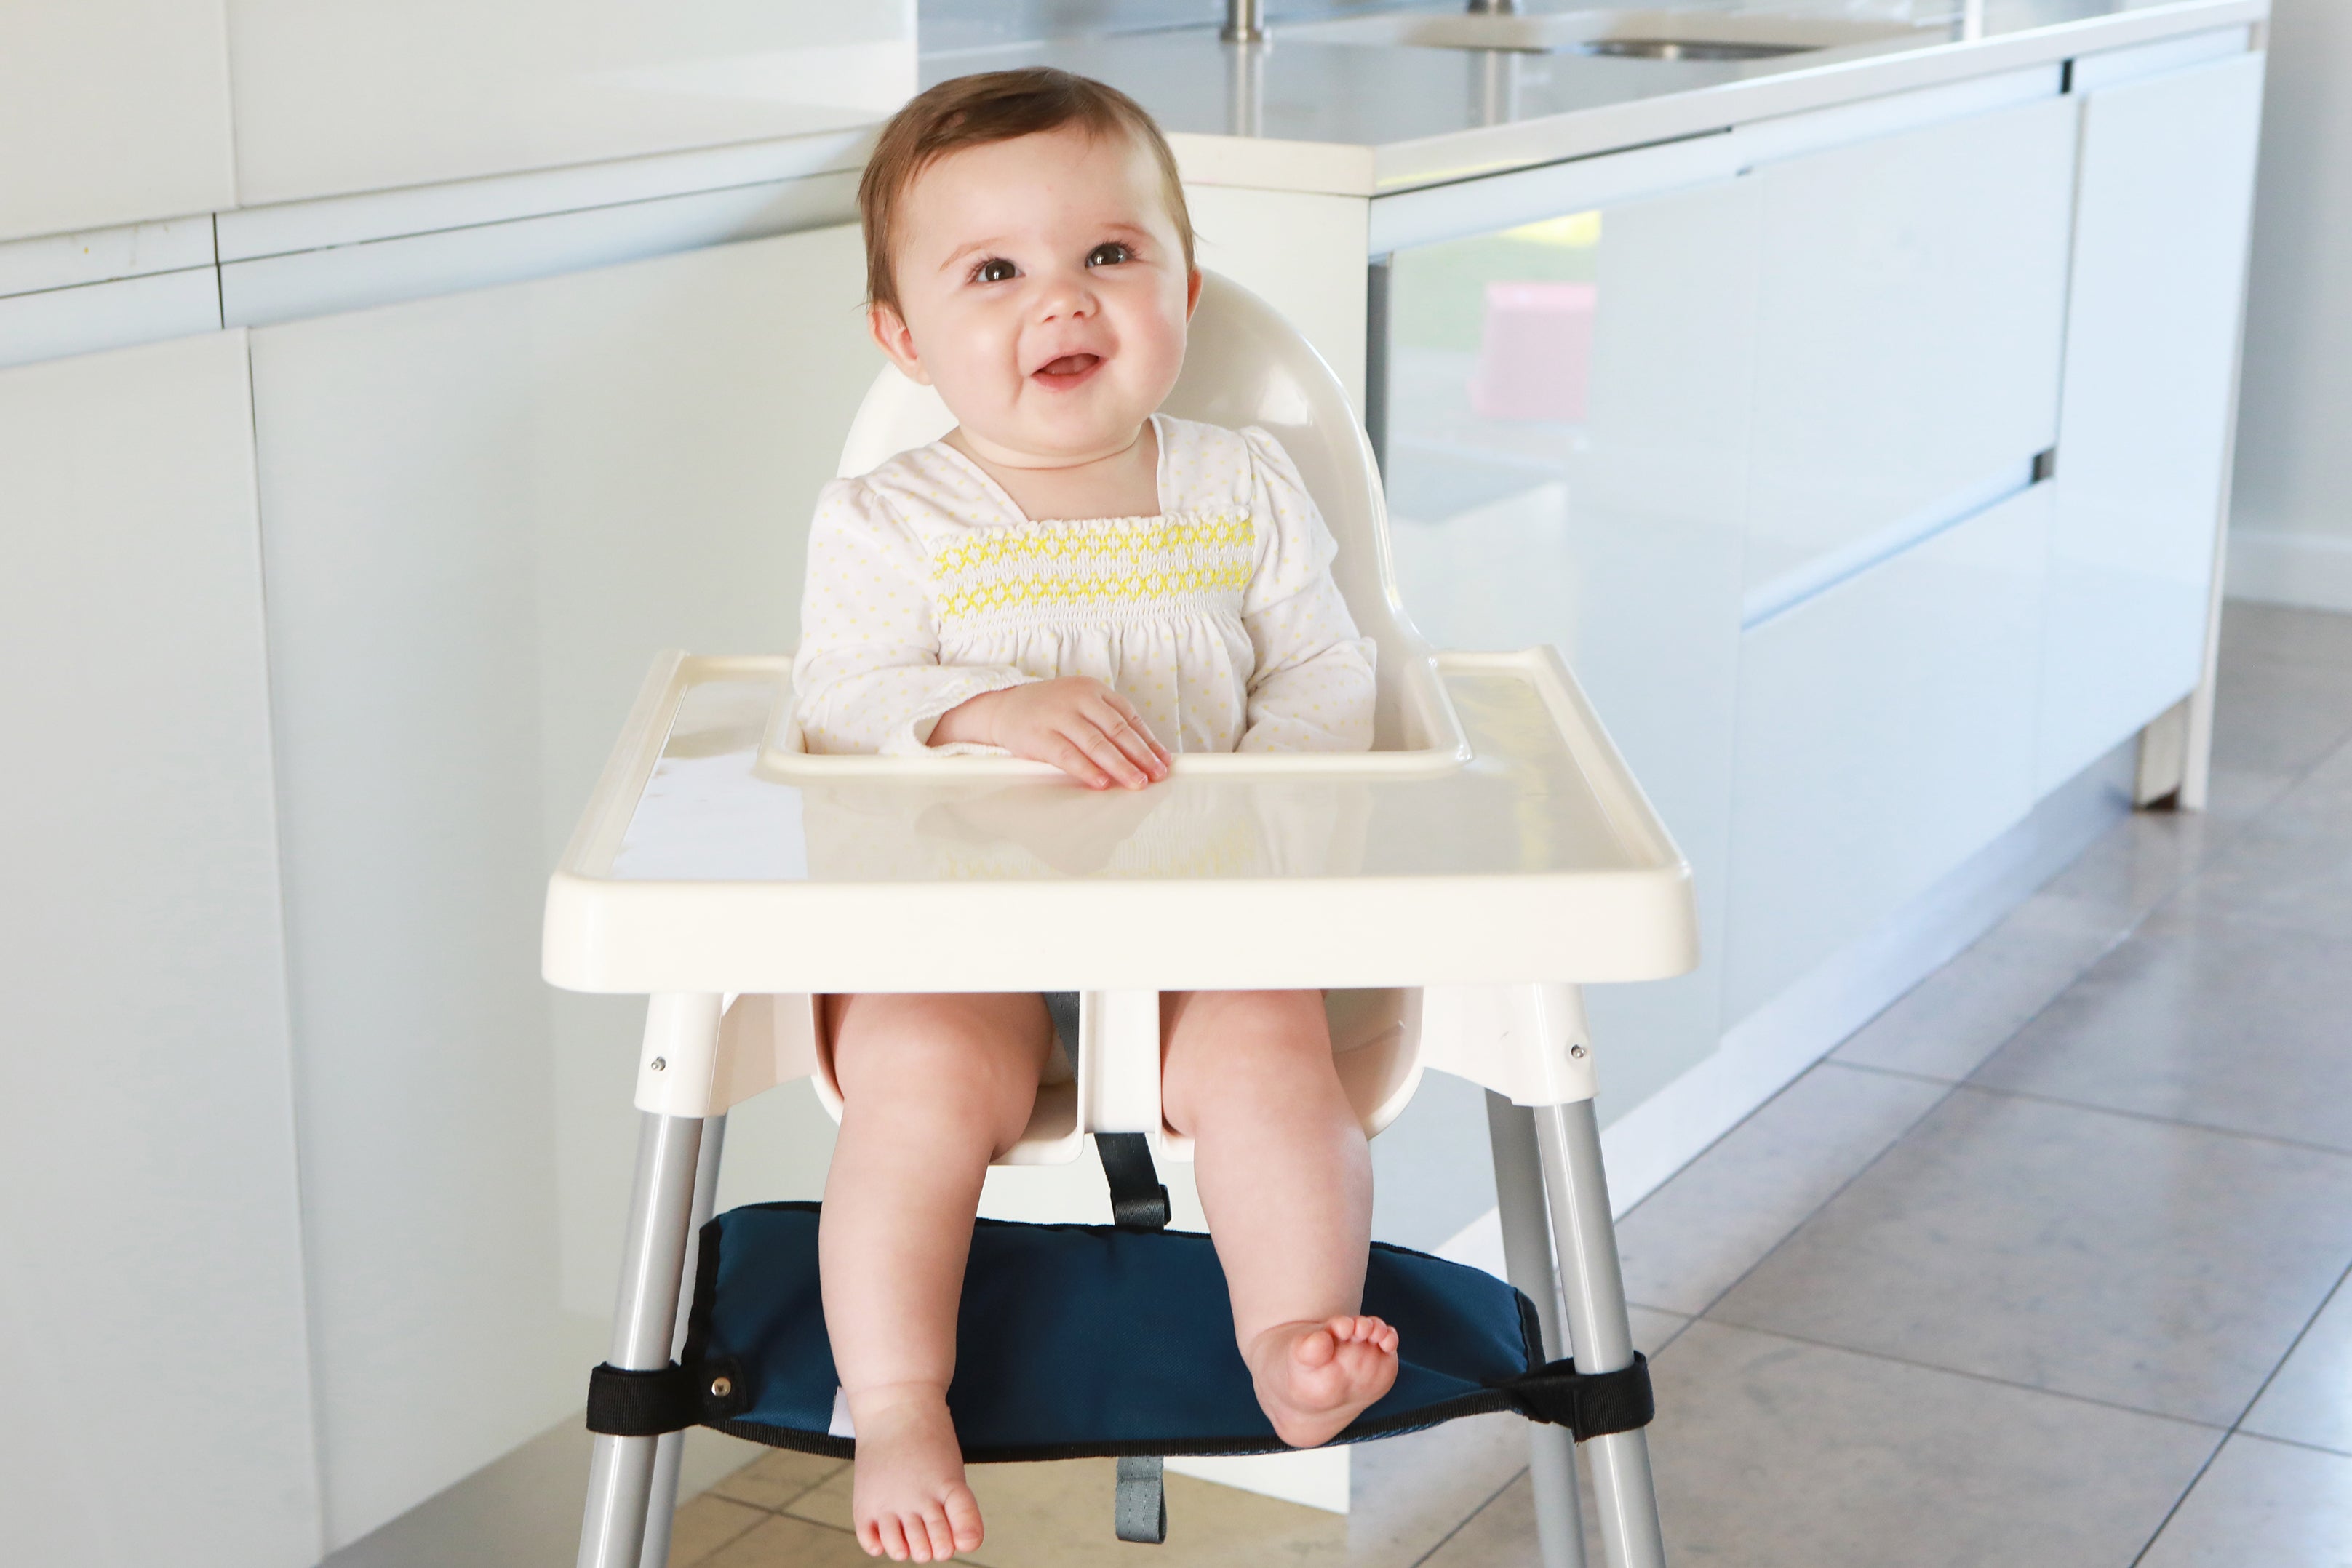 If already have a high chair, but the footrest isn't there, check out